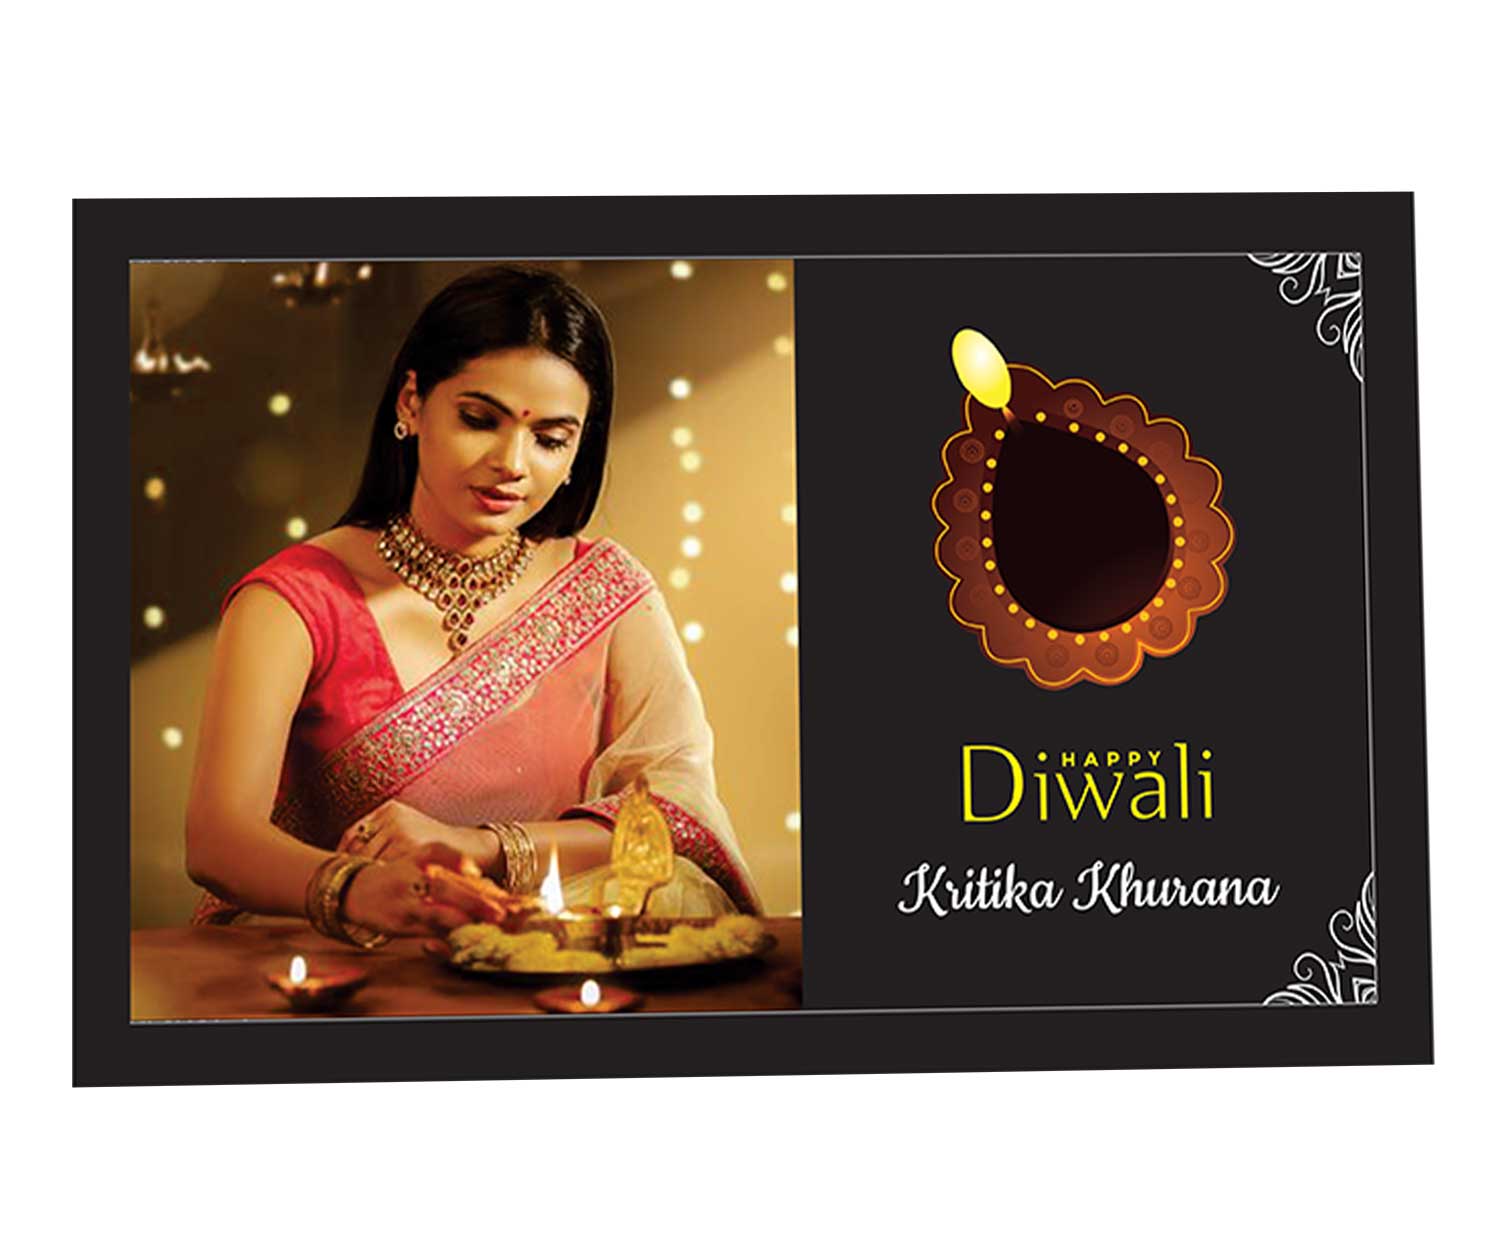 best Diwali chocolate for gift, chocolate for Diwali gift giving,chocolate for gift in india, chocolate for gift,chocolate for gift